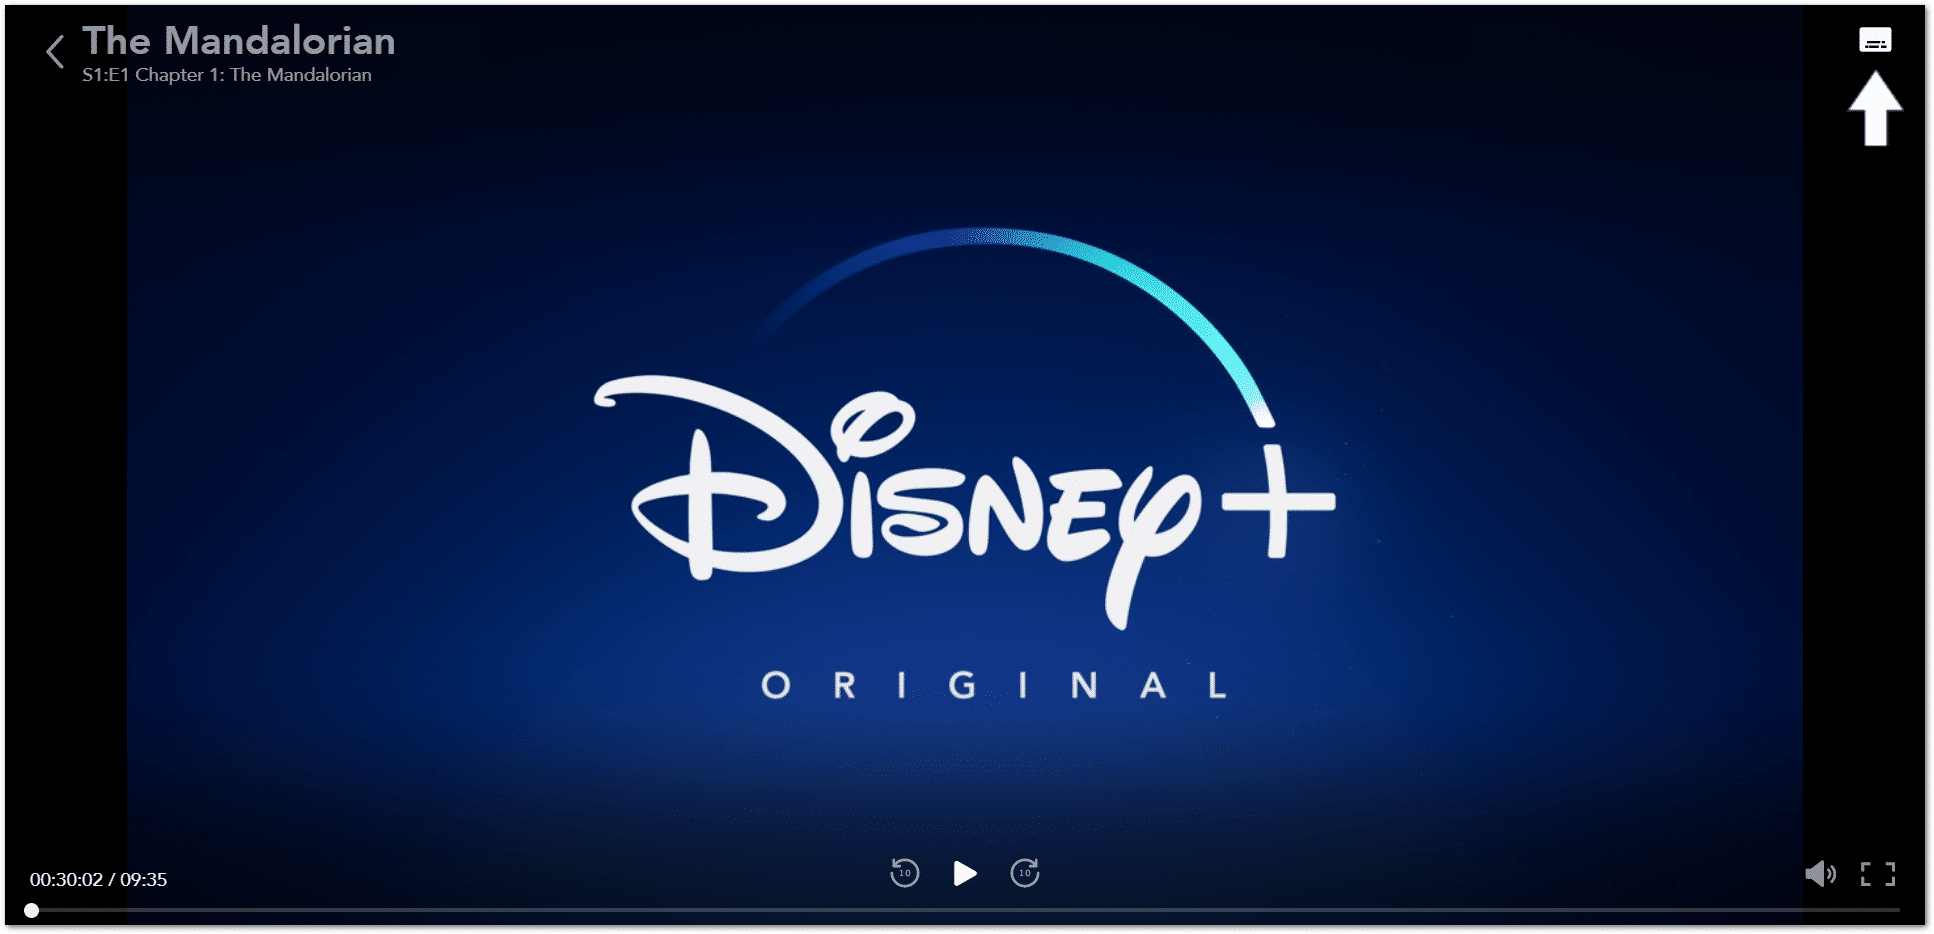 access subtitles settings on Disney Plus video player to fix subtitles or closed captions not working